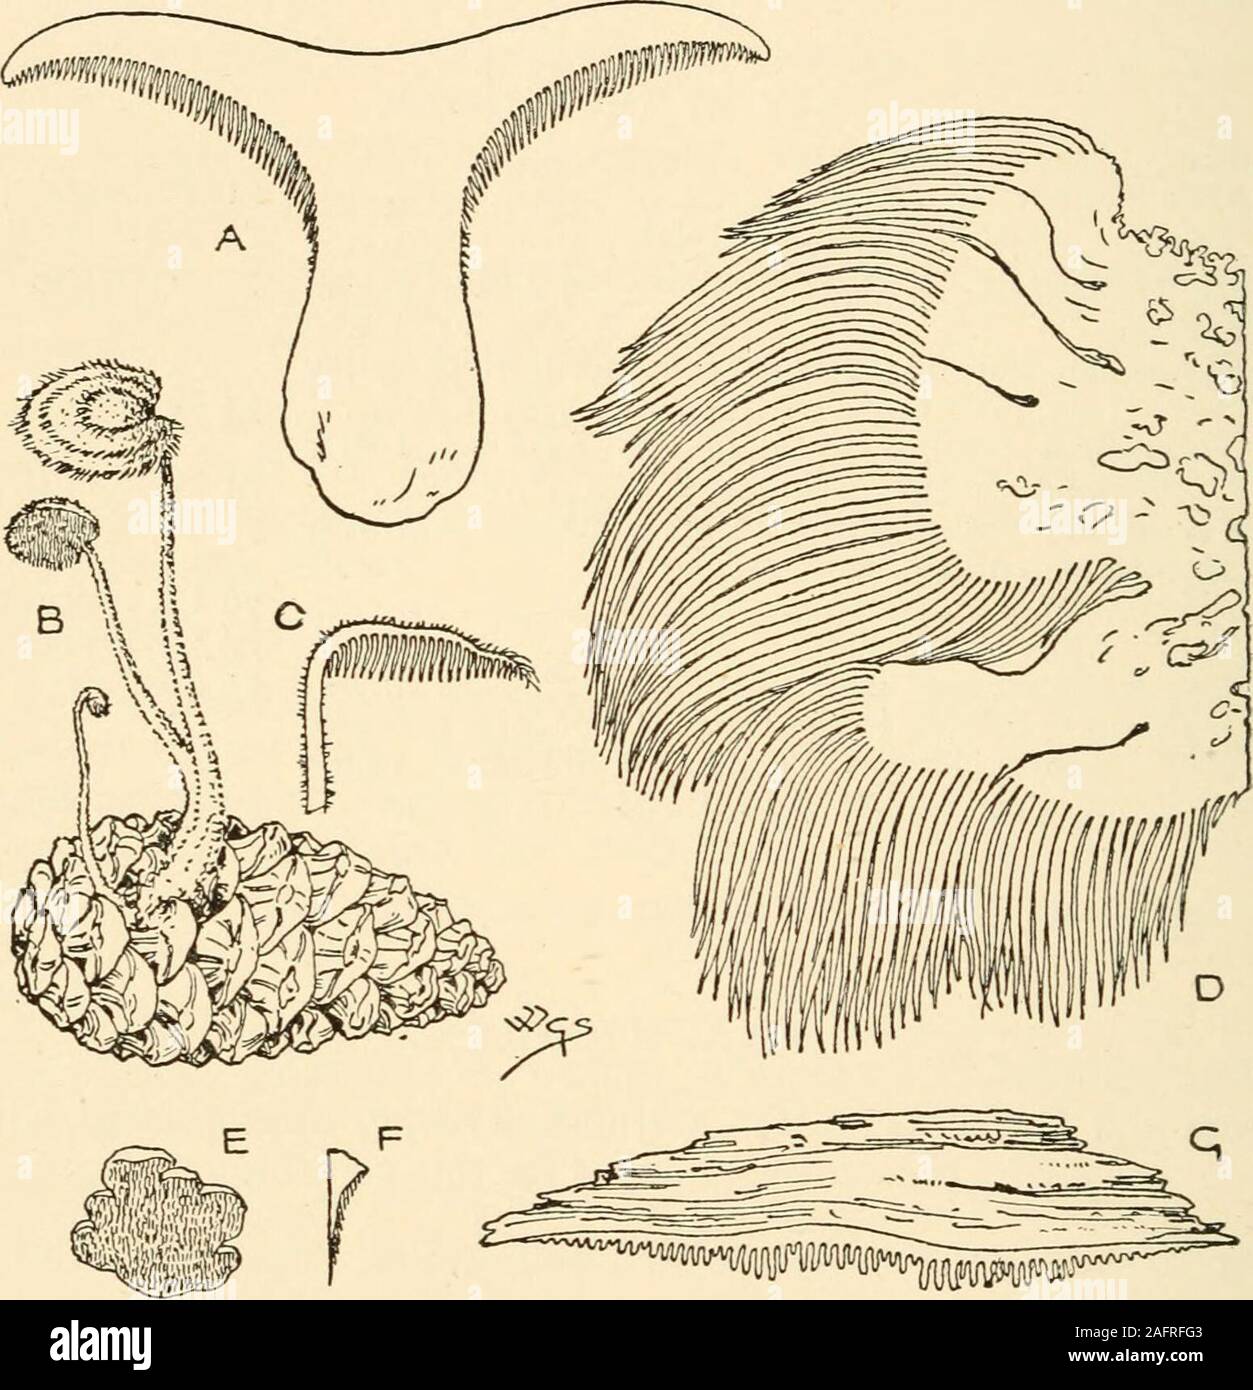 . Synopsis of the British Basidiomycetes ; a descriptive catalogue of the drawings and specimens in the Department of botany, British museum. usually distant bristles. Subiculum nearly obsolete 79 Mucronella. LXX. HYDNUM L. (From the Greek name for a truffle, Aydnon, appropriated without reason by Linnaaus for this genus.) Hymenium inferior in the first four series, superior in the fifth.Spines awl-shaped, acute, distinct at the base. (Fig. 85.) Species 1687—1745 Mesopod^e. Stem central. Terrestrial, chiefly in pine woods. a. Carnosce. Pileus fleshy, somewhat fragile, stem solid.Mostly edible. Stock Photo